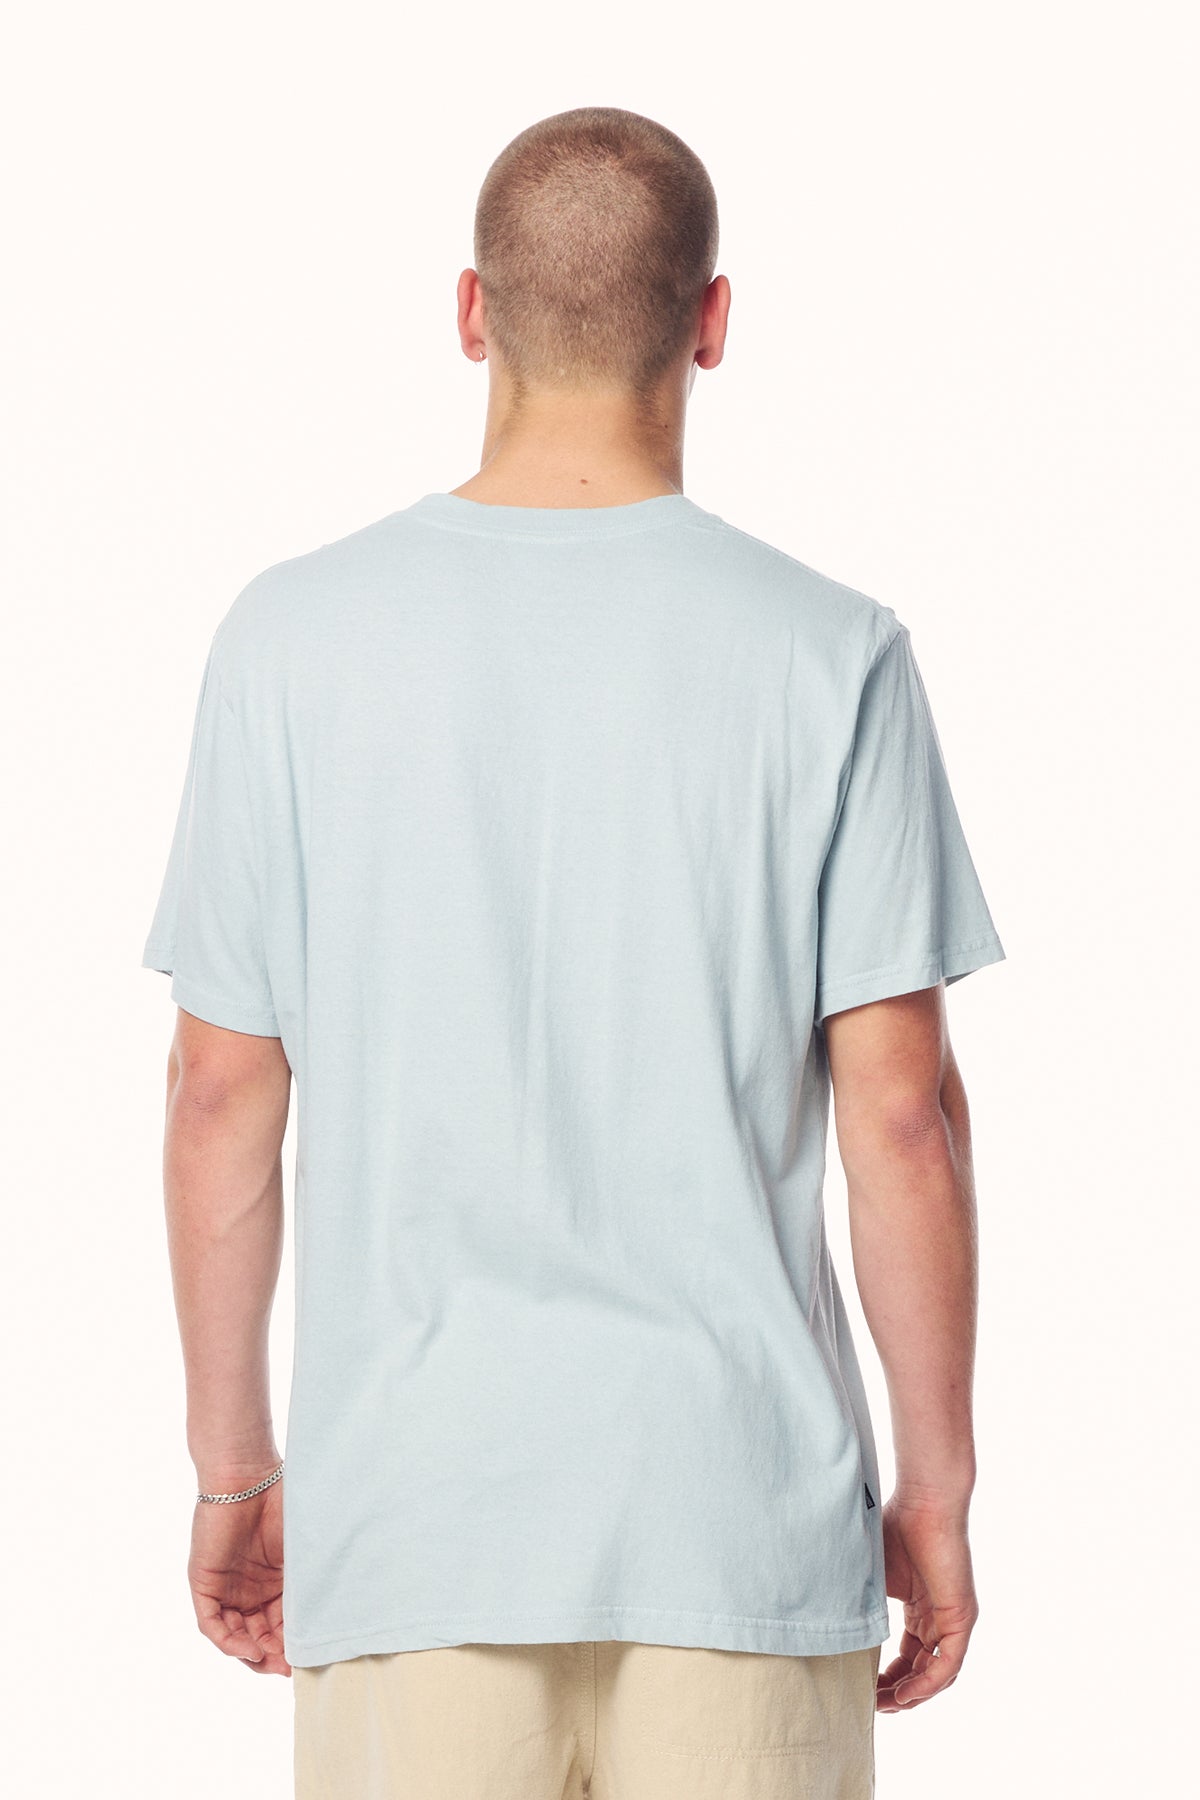 THERMAL SHOCK 50/50 SS TEE - Pigment Cloud Blue